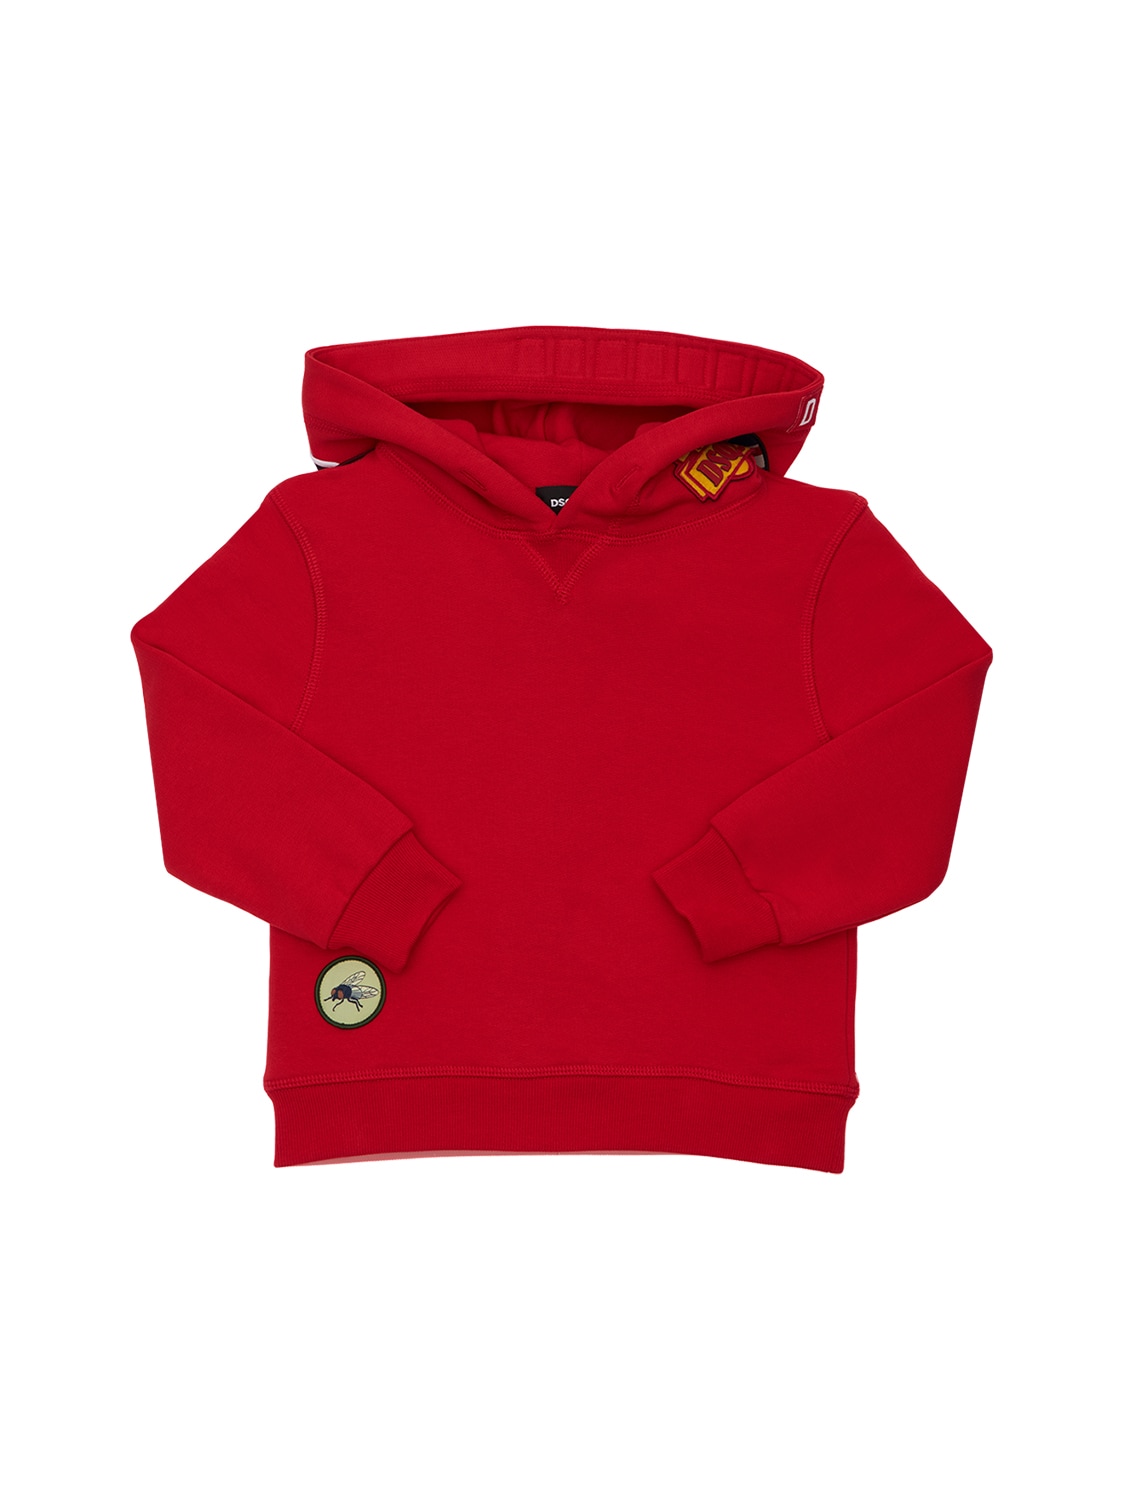 Dsquared2 Kids' Cotton Sweatshirt Hoodie W/ Patches In Red